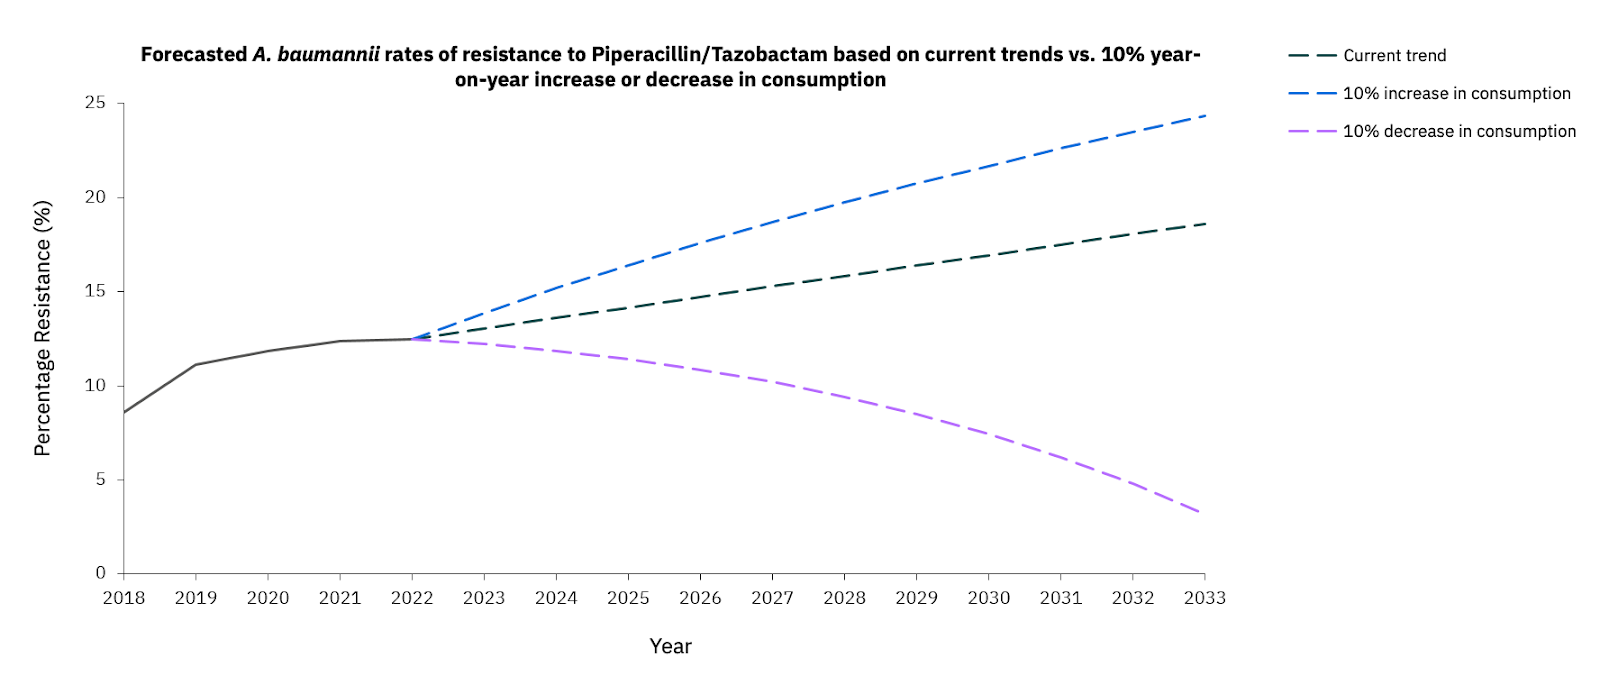 Resistance to first-line antibiotic piperacillin/tazobactam to grow from 12% to 25% in the UK by 2033